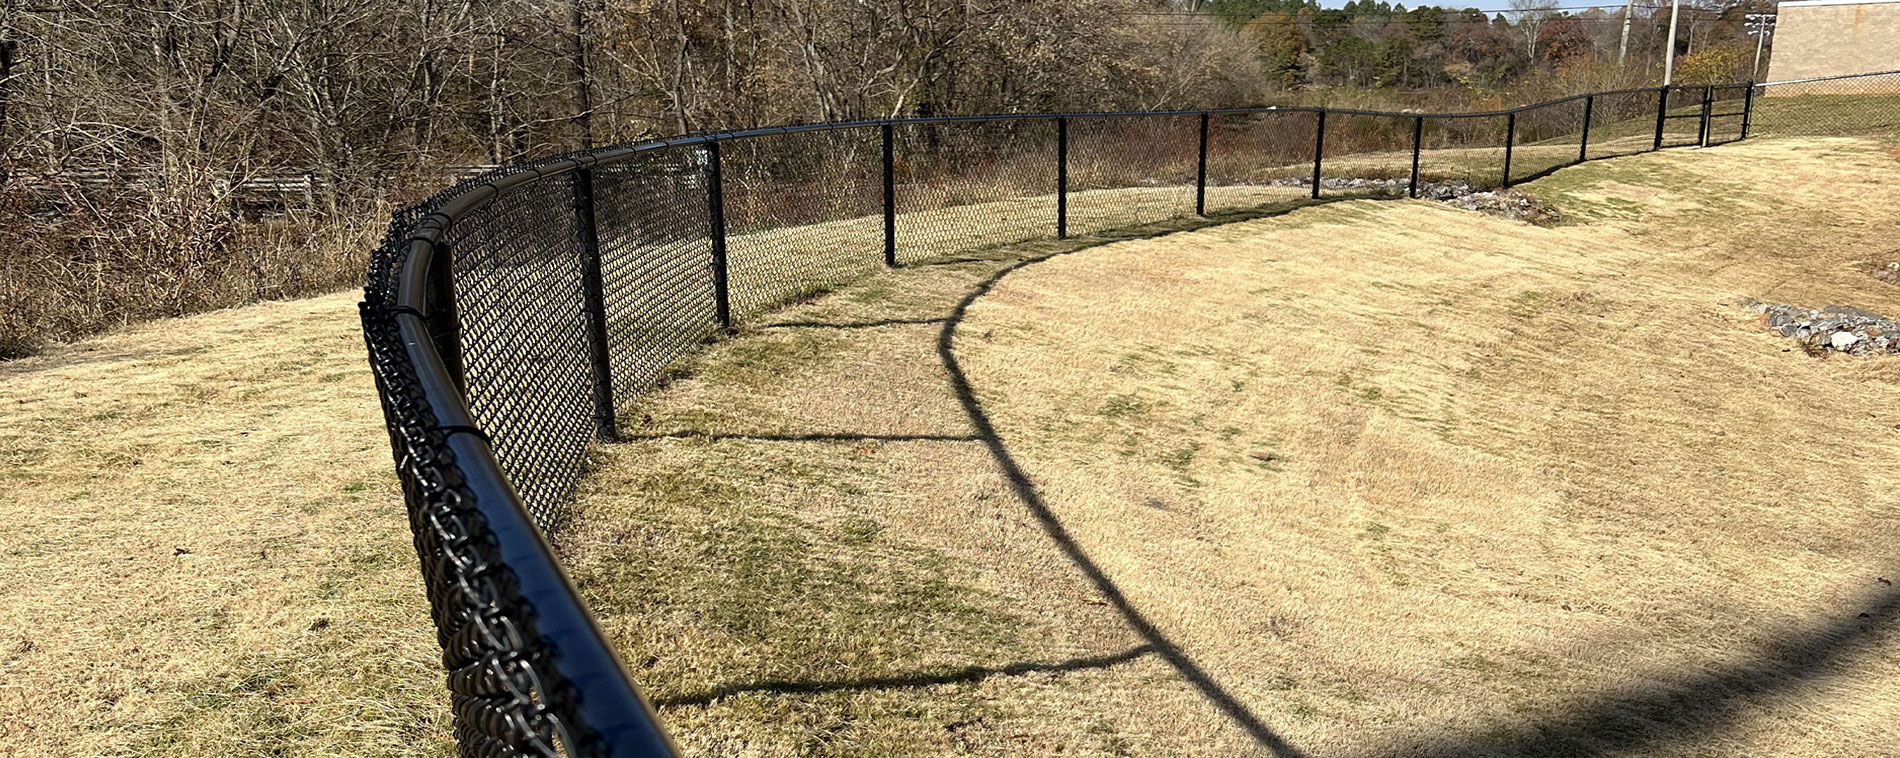 Black round fence tubing used in a chain link fence